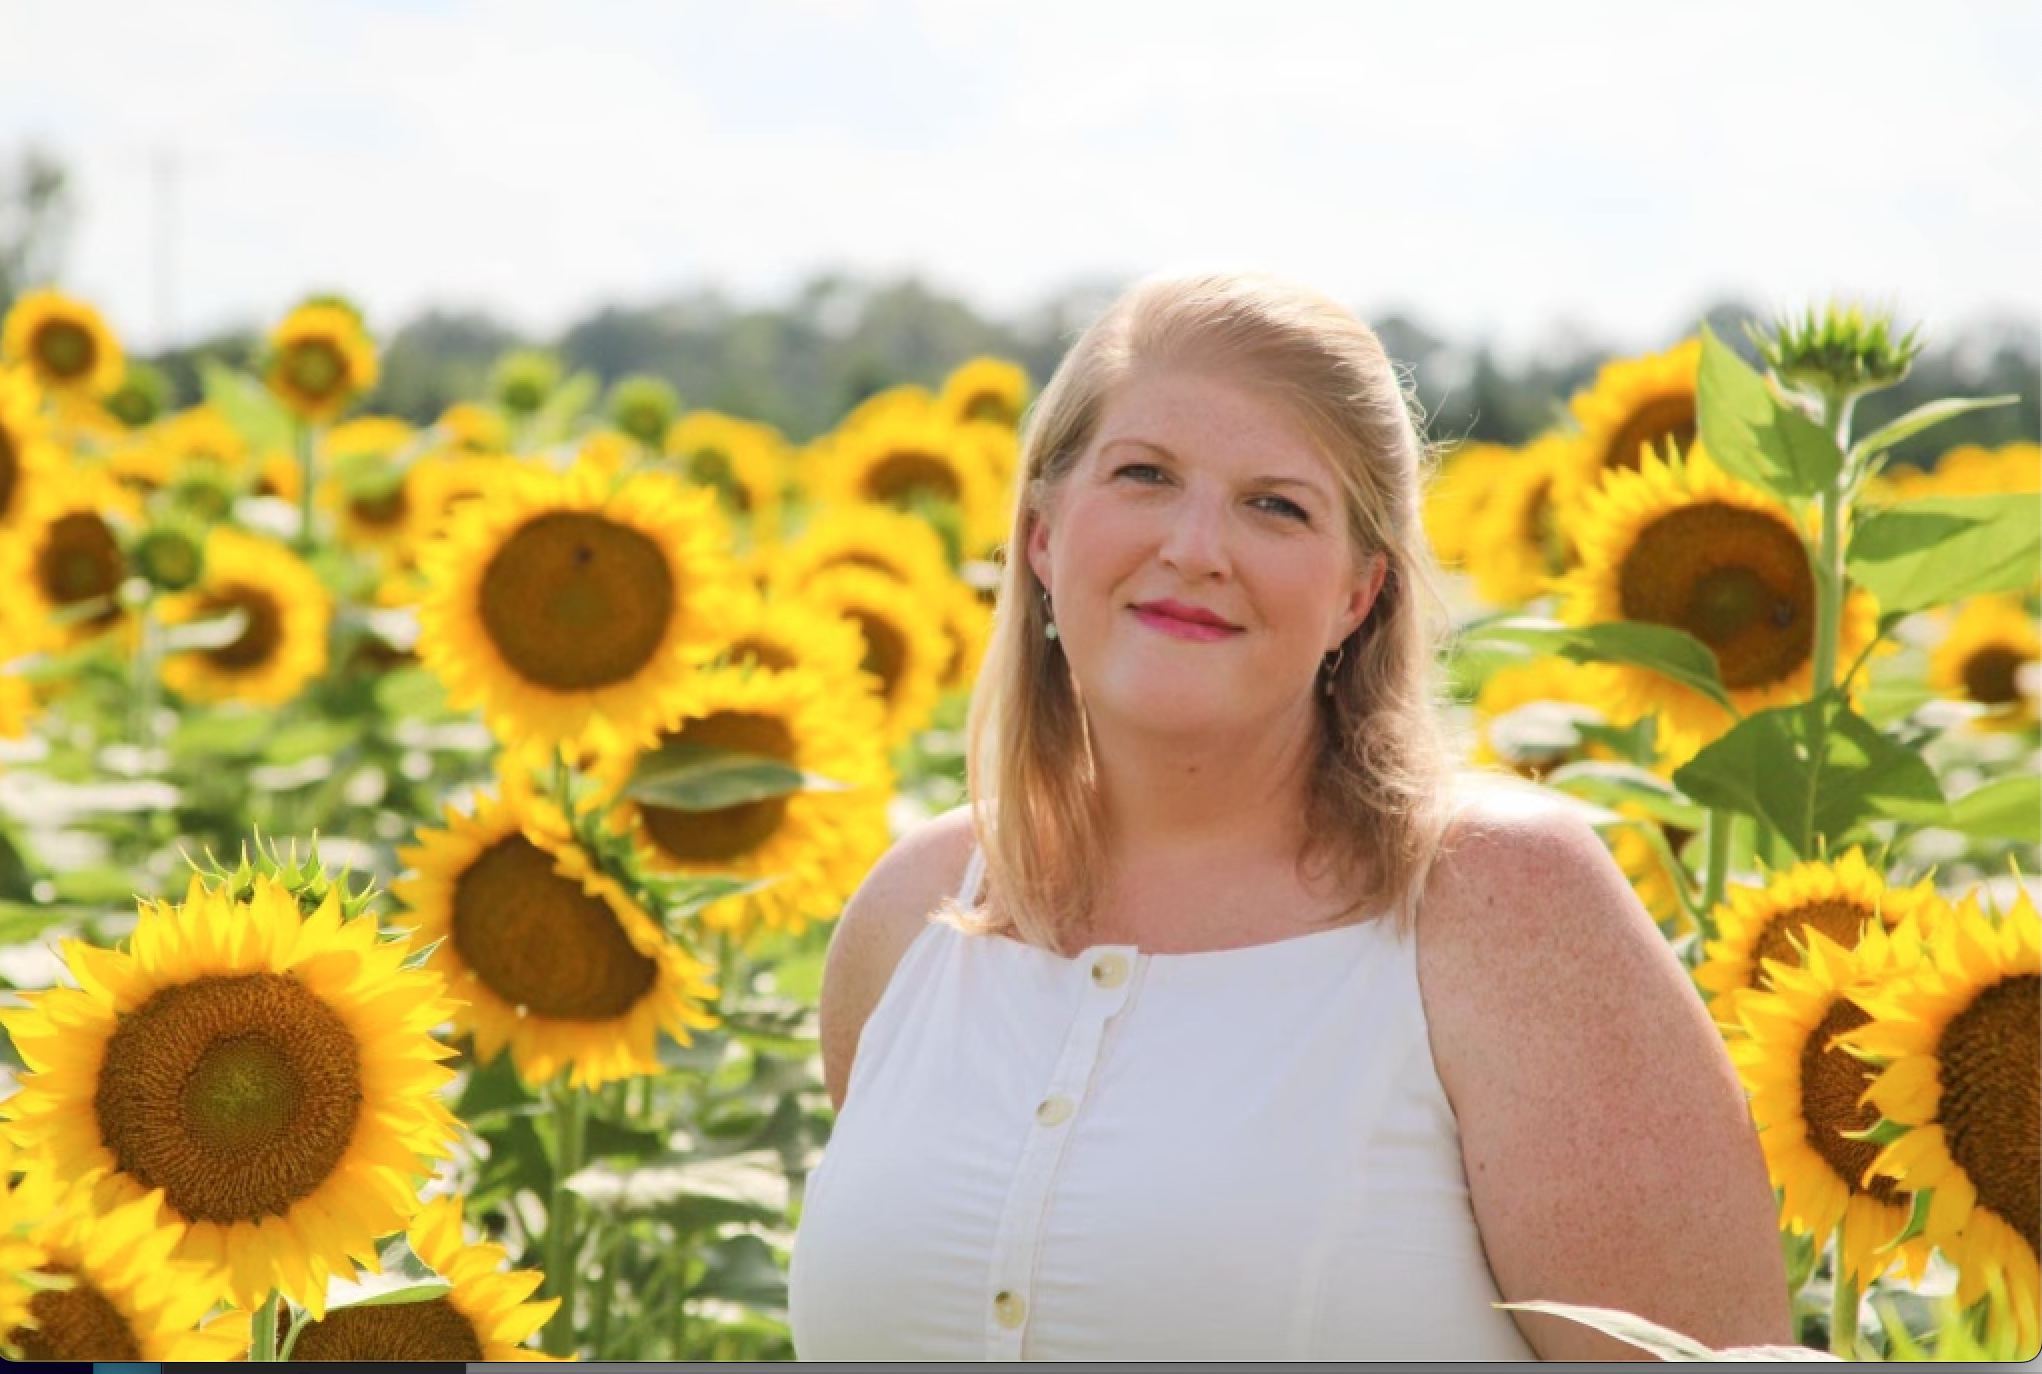 Mrs. Amanda standing in front of sunflowers